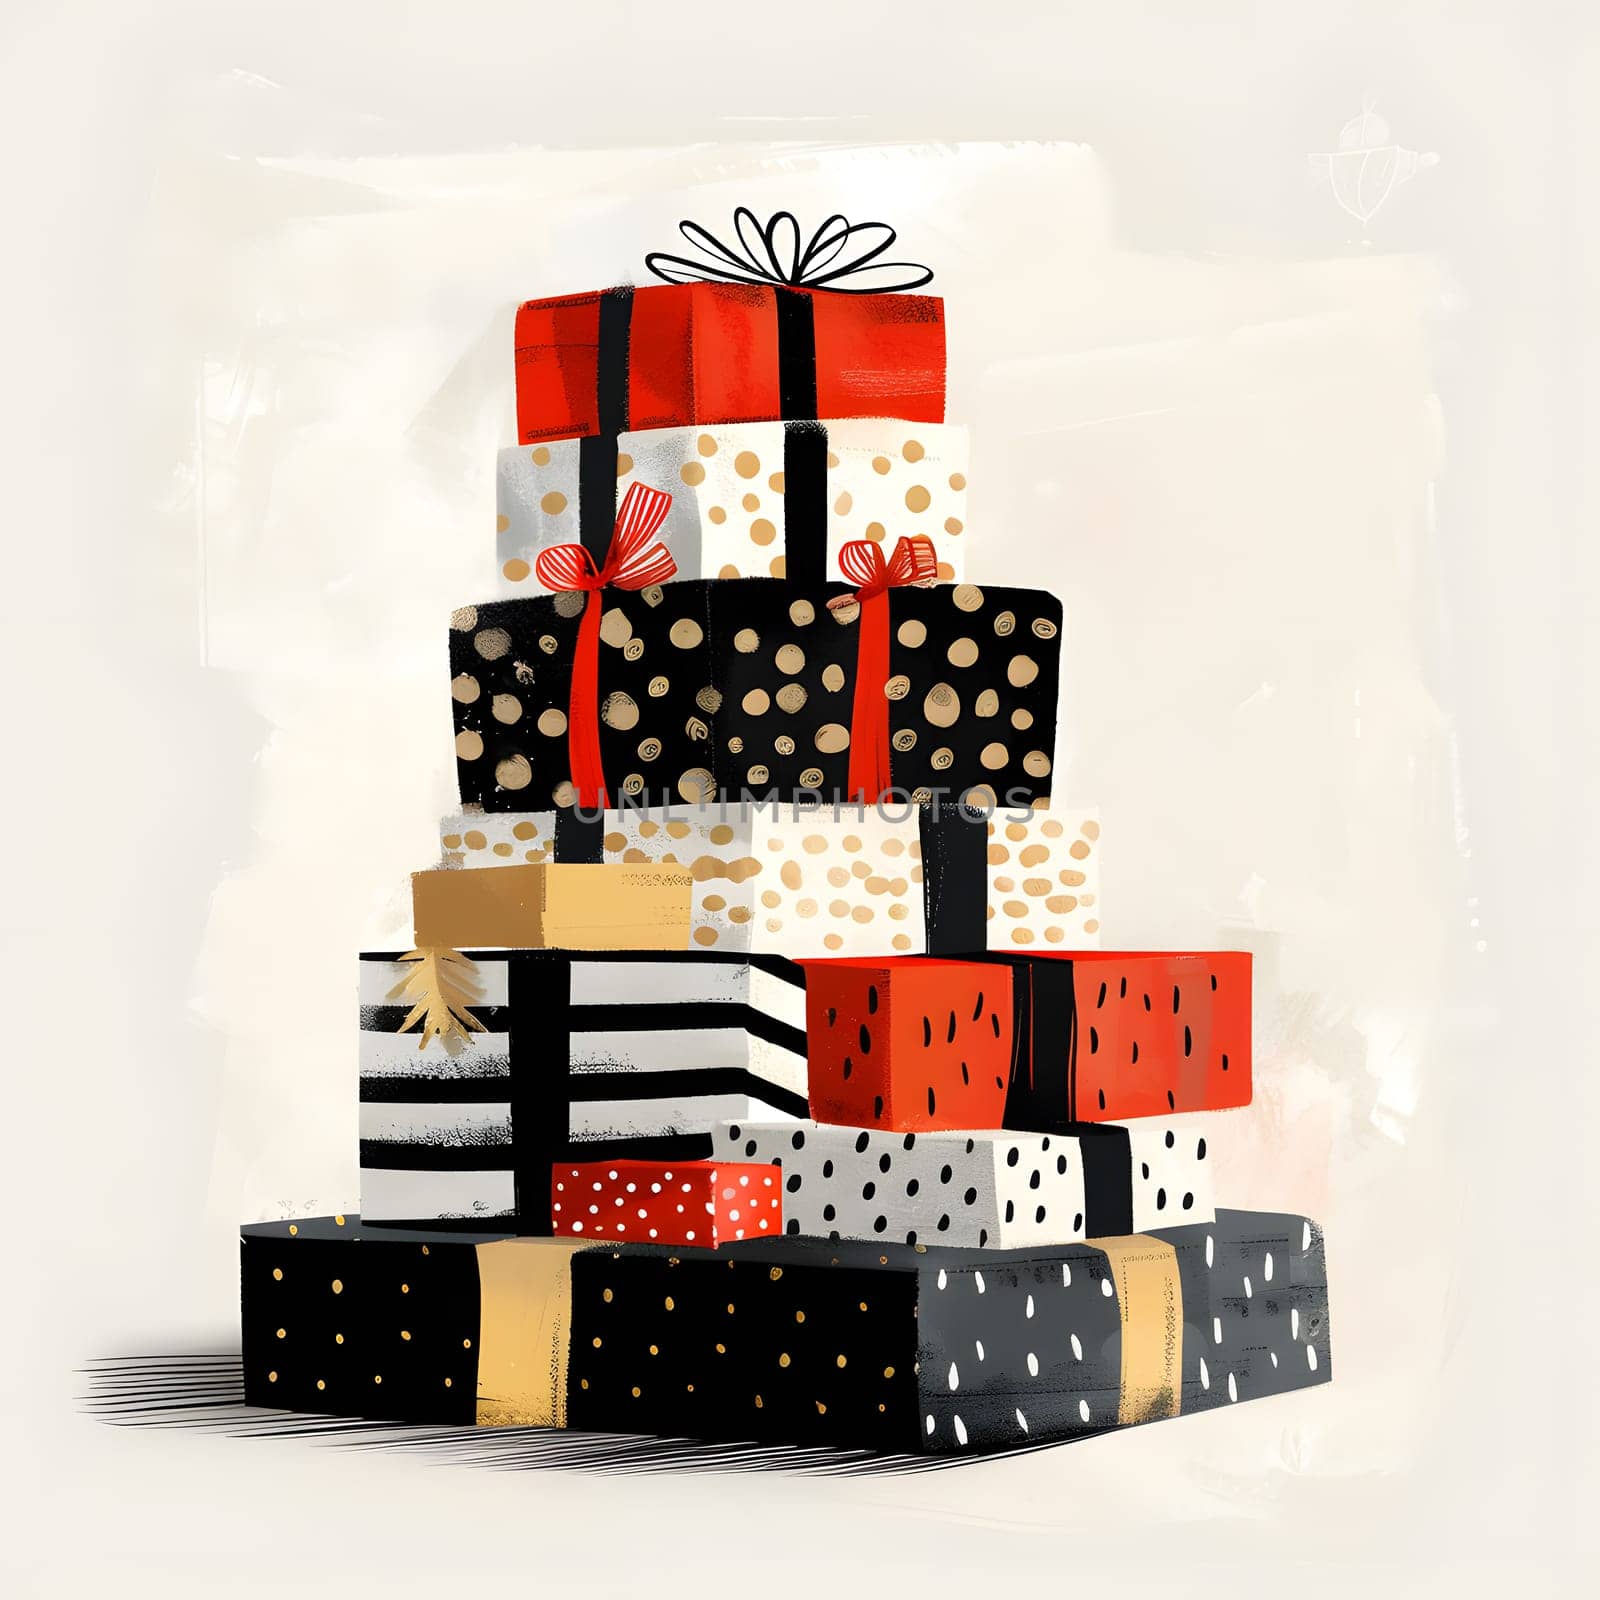 A collection of rectangular gift boxes wrapped in various colorful patterns, resembling toy blocks with creative arts and fashion accessory designs